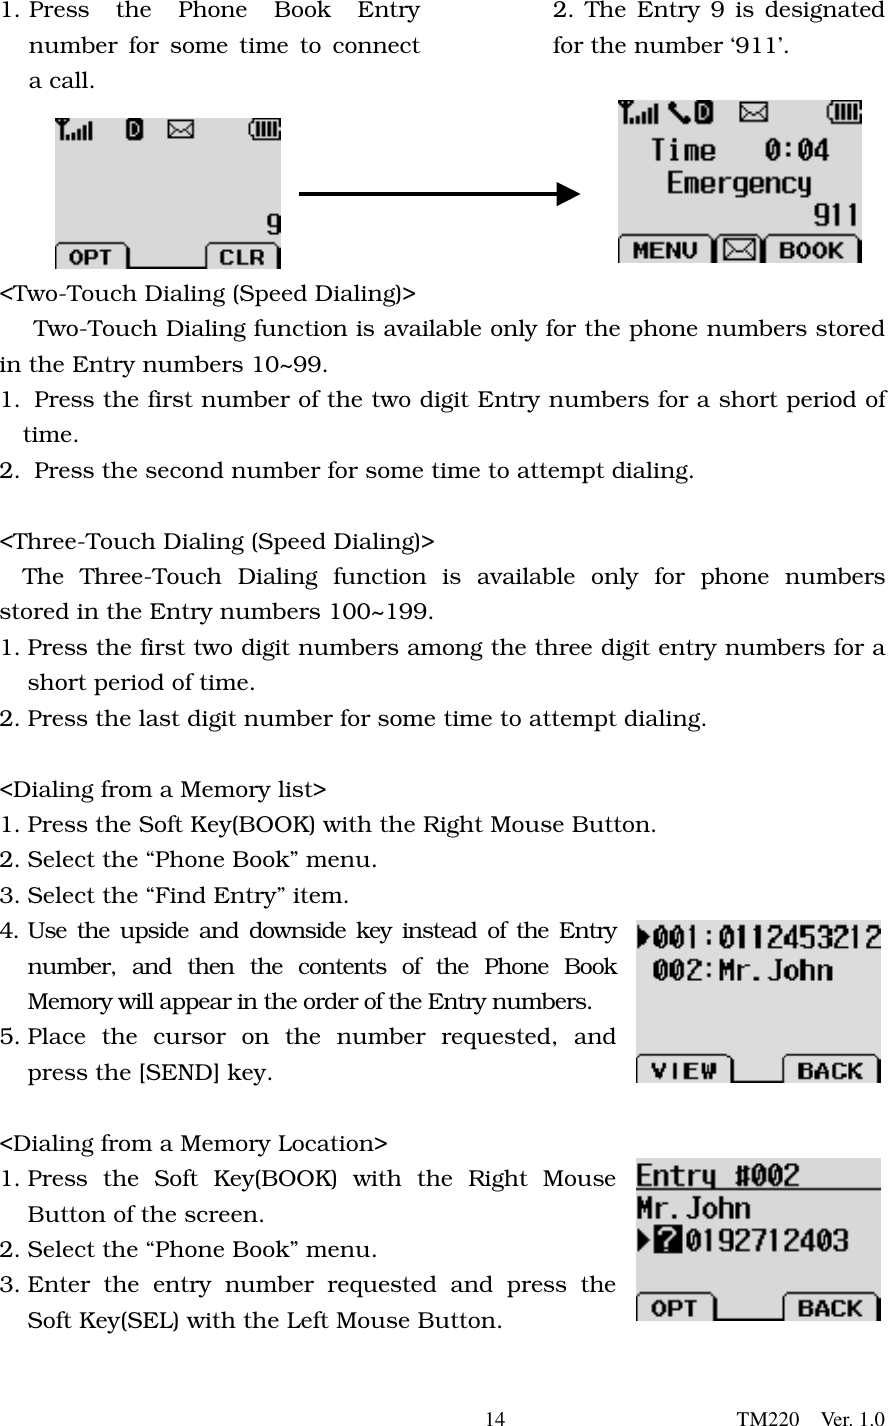       14                      TM220  Ver. 1.0 1. Press the Phone Book Entry number for some time to connect a call.   2. The Entry 9 is designated for the number ‘911’.        &lt;Two-Touch Dialing (Speed Dialing)&gt;    Two-Touch Dialing function is available only for the phone numbers stored in the Entry numbers 10~99. 1.  Press the first number of the two digit Entry numbers for a short period of time. 2.   Press the second number for some time to attempt dialing.    &lt;Three-Touch Dialing (Speed Dialing)&gt; The Three-Touch Dialing function is available only for phone numbers stored in the Entry numbers 100~199. 1. Press the first two digit numbers among the three digit entry numbers for a short period of time.   2. Press the last digit number for some time to attempt dialing.    &lt;Dialing from a Memory list&gt; 1. Press the Soft Key(BOOK) with the Right Mouse Button. 2. Select the “Phone Book” menu.   3. Select the “Find Entry” item.   4. Use the upside and downside key instead of the Entry number, and then the contents of the Phone Book Memory will appear in the order of the Entry numbers.  5. Place the cursor on the number requested, and press the [SEND] key.  &lt;Dialing from a Memory Location&gt; 1. Press the Soft Key(BOOK) with the Right Mouse Button of the screen. 2. Select the “Phone Book” menu. 3. Enter the entry number requested and press the Soft Key(SEL) with the Left Mouse Button. 